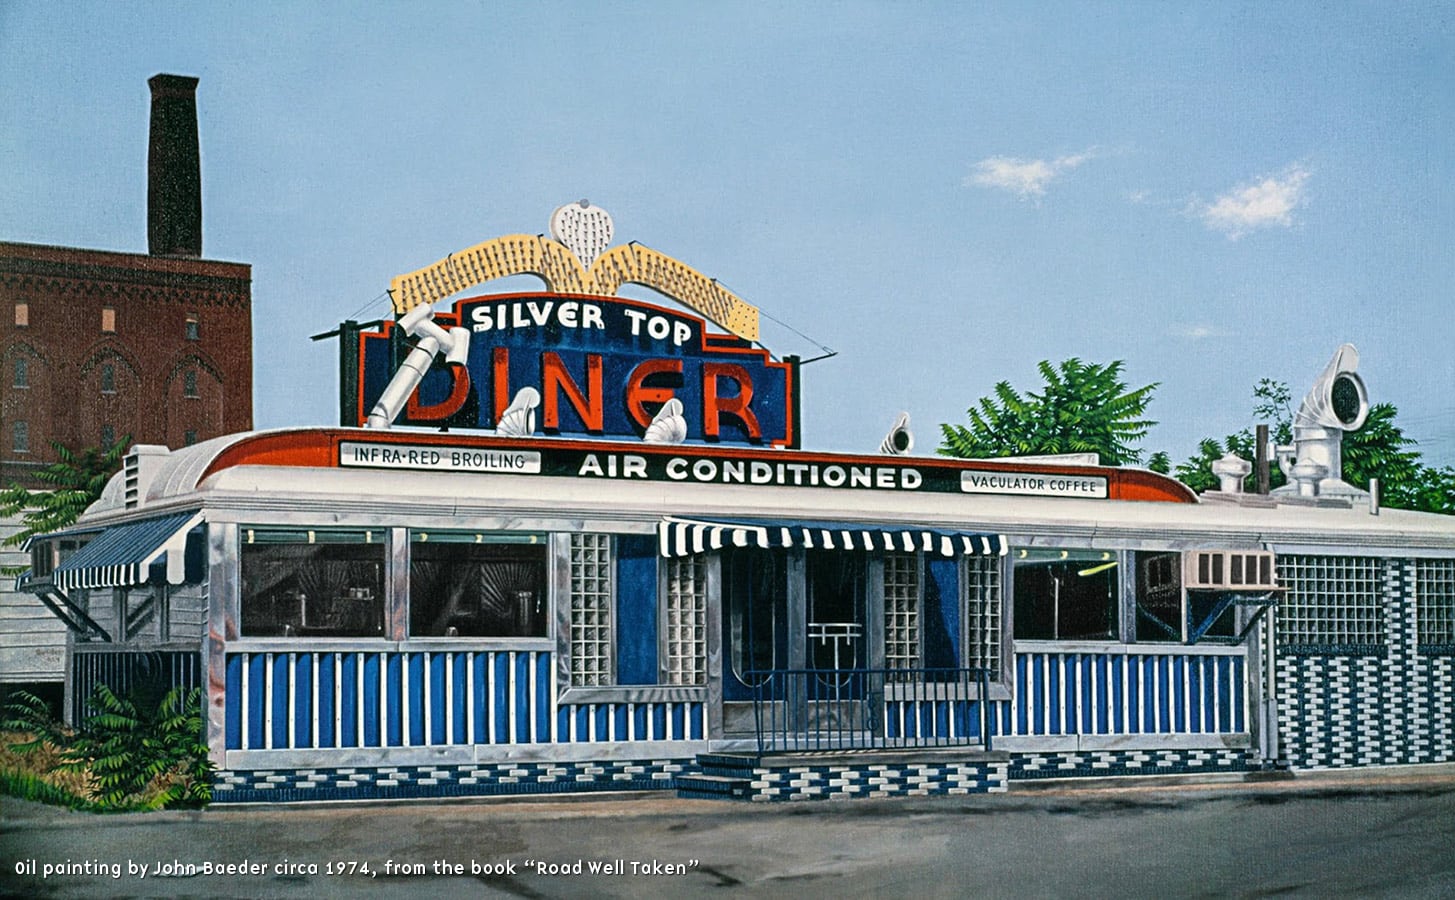 A metal and enamel-clad pre-manifactured diner car resembling a streamlined train car. The exterior has blue, silver, and red details. A central entrance vestibule is located on the front. The diner is long but not very deep — again, much like a train or subway car. The interior is a mix of built-in-place metal, enamel, and formica booths, countertop, stools, and stainless steel kitchen area with flat-top grill and good-prep station.